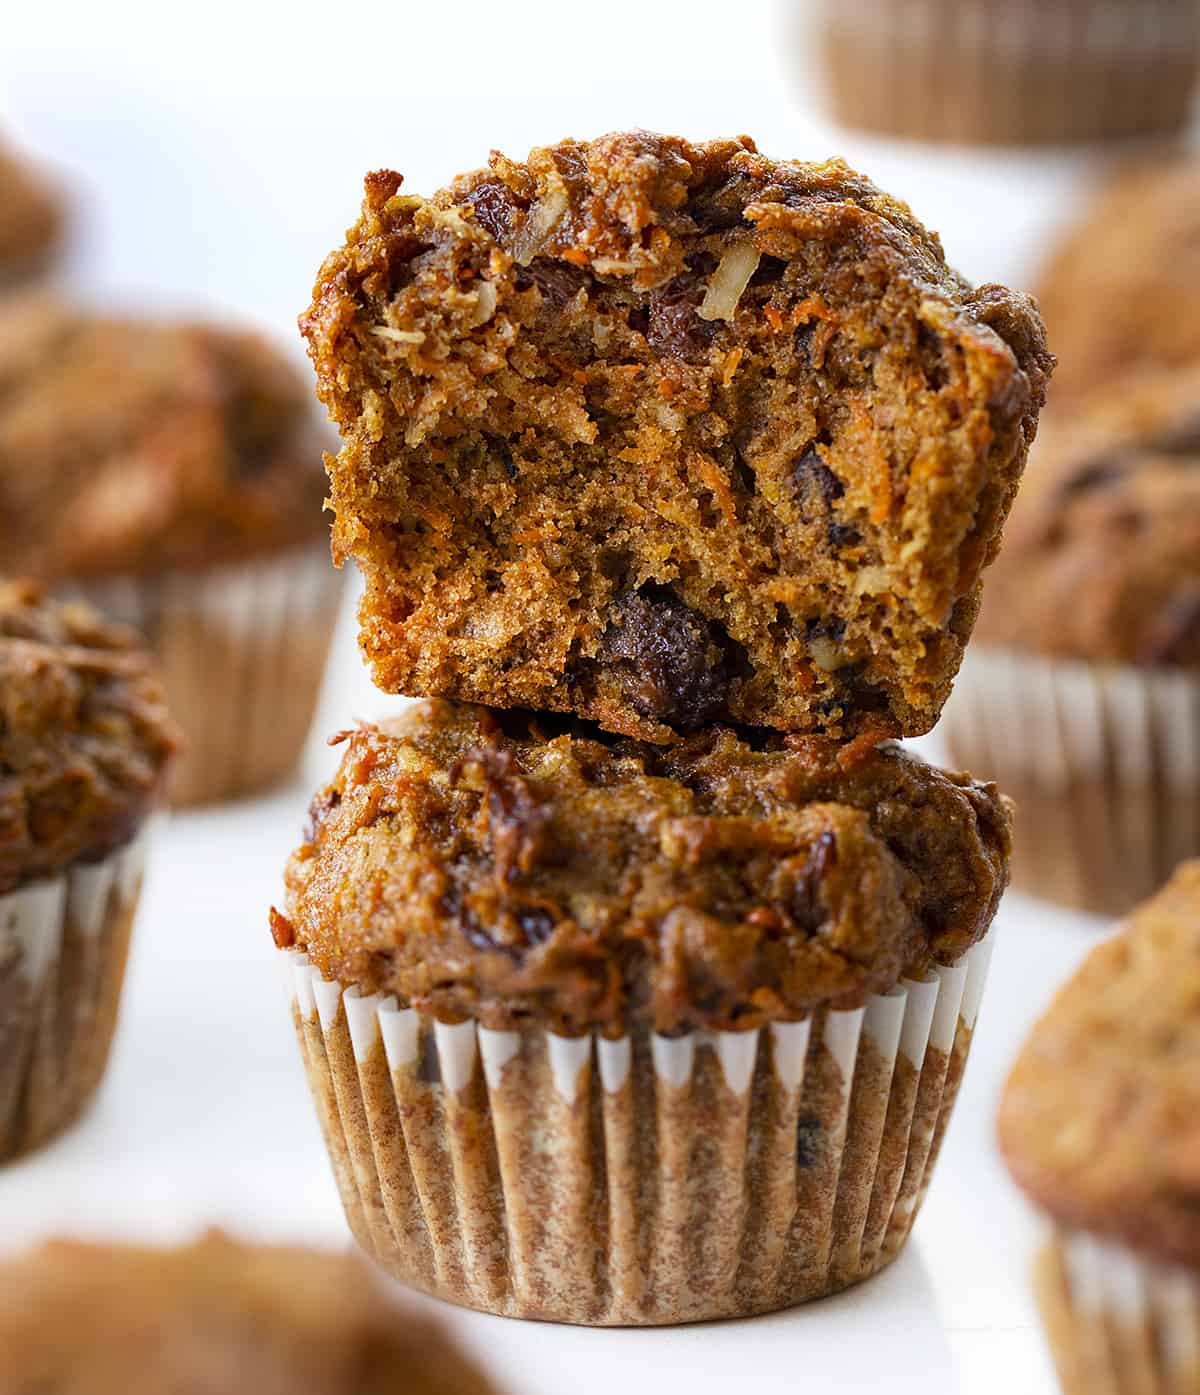 Morning Glory Muffins Stacked with One Cut in Half. Breakfast, Muffins, Muffin Recipes, Healthy Muffins, What are Morning Glory Muffins, Snacks, Baking, i am baker, iambaker